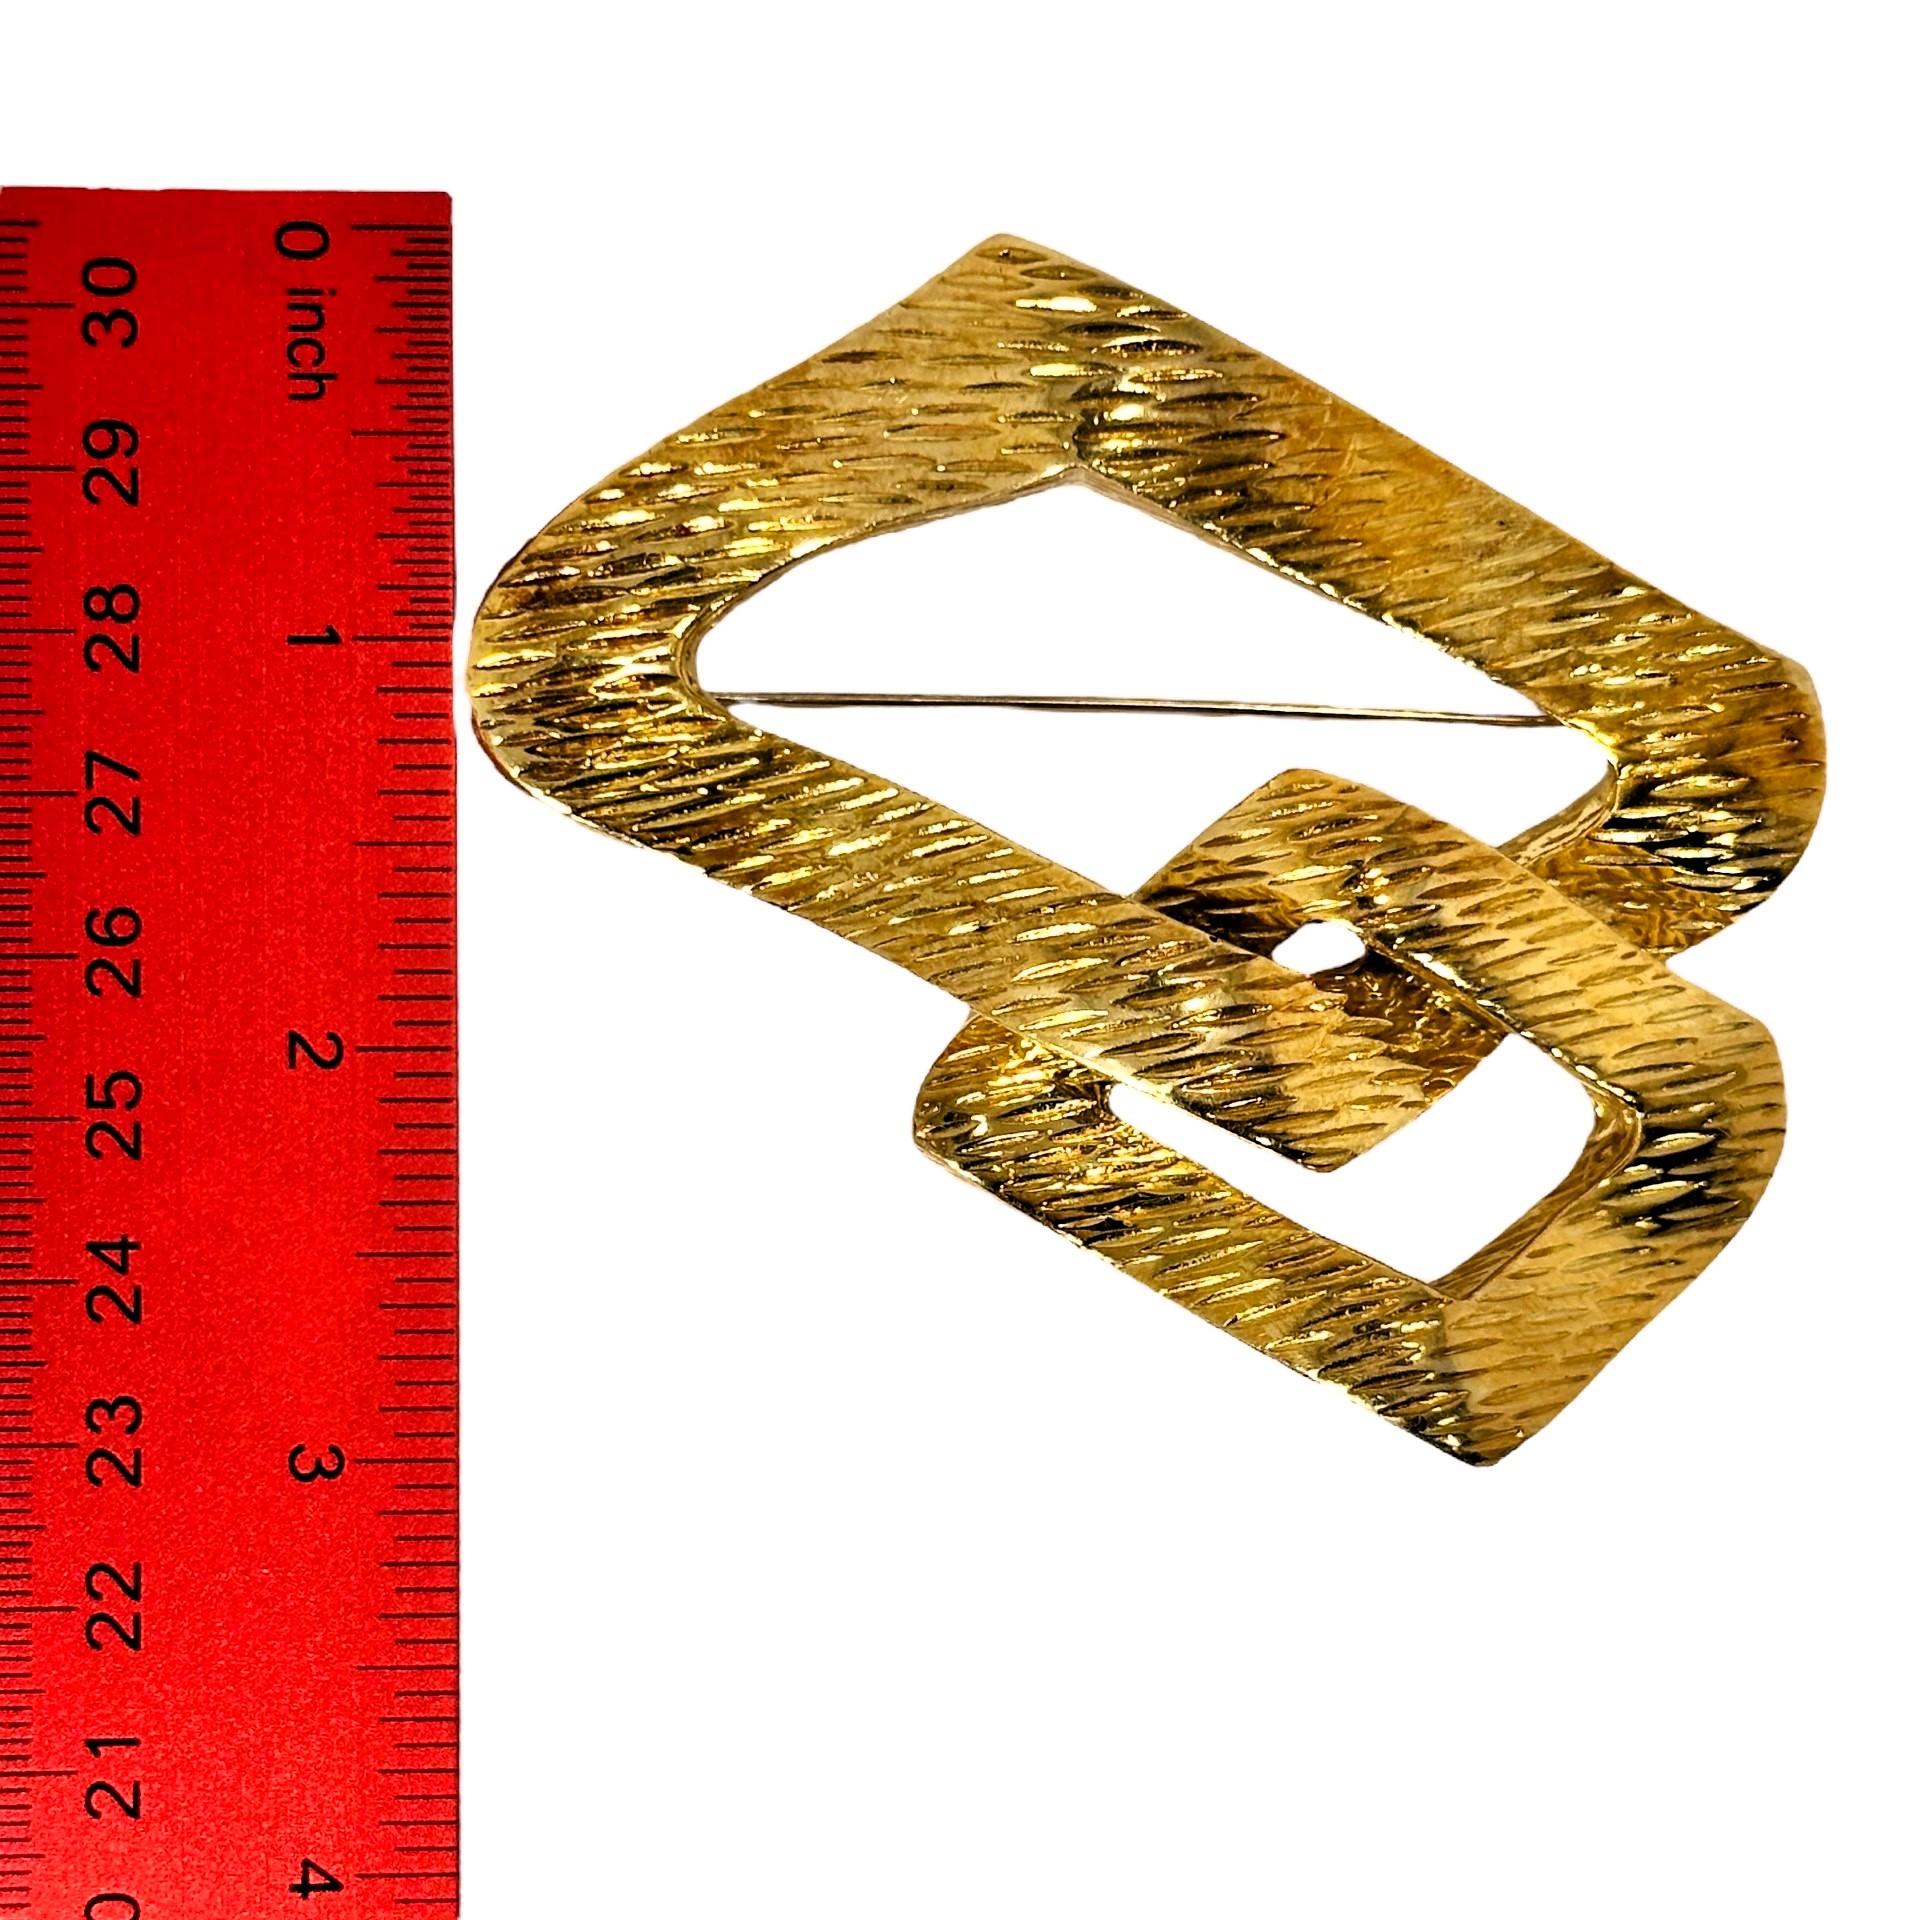 1960s-1970s French Bark Finish Gold Pendant Brooch by Wander 3 1/2 Inches Long  For Sale 4